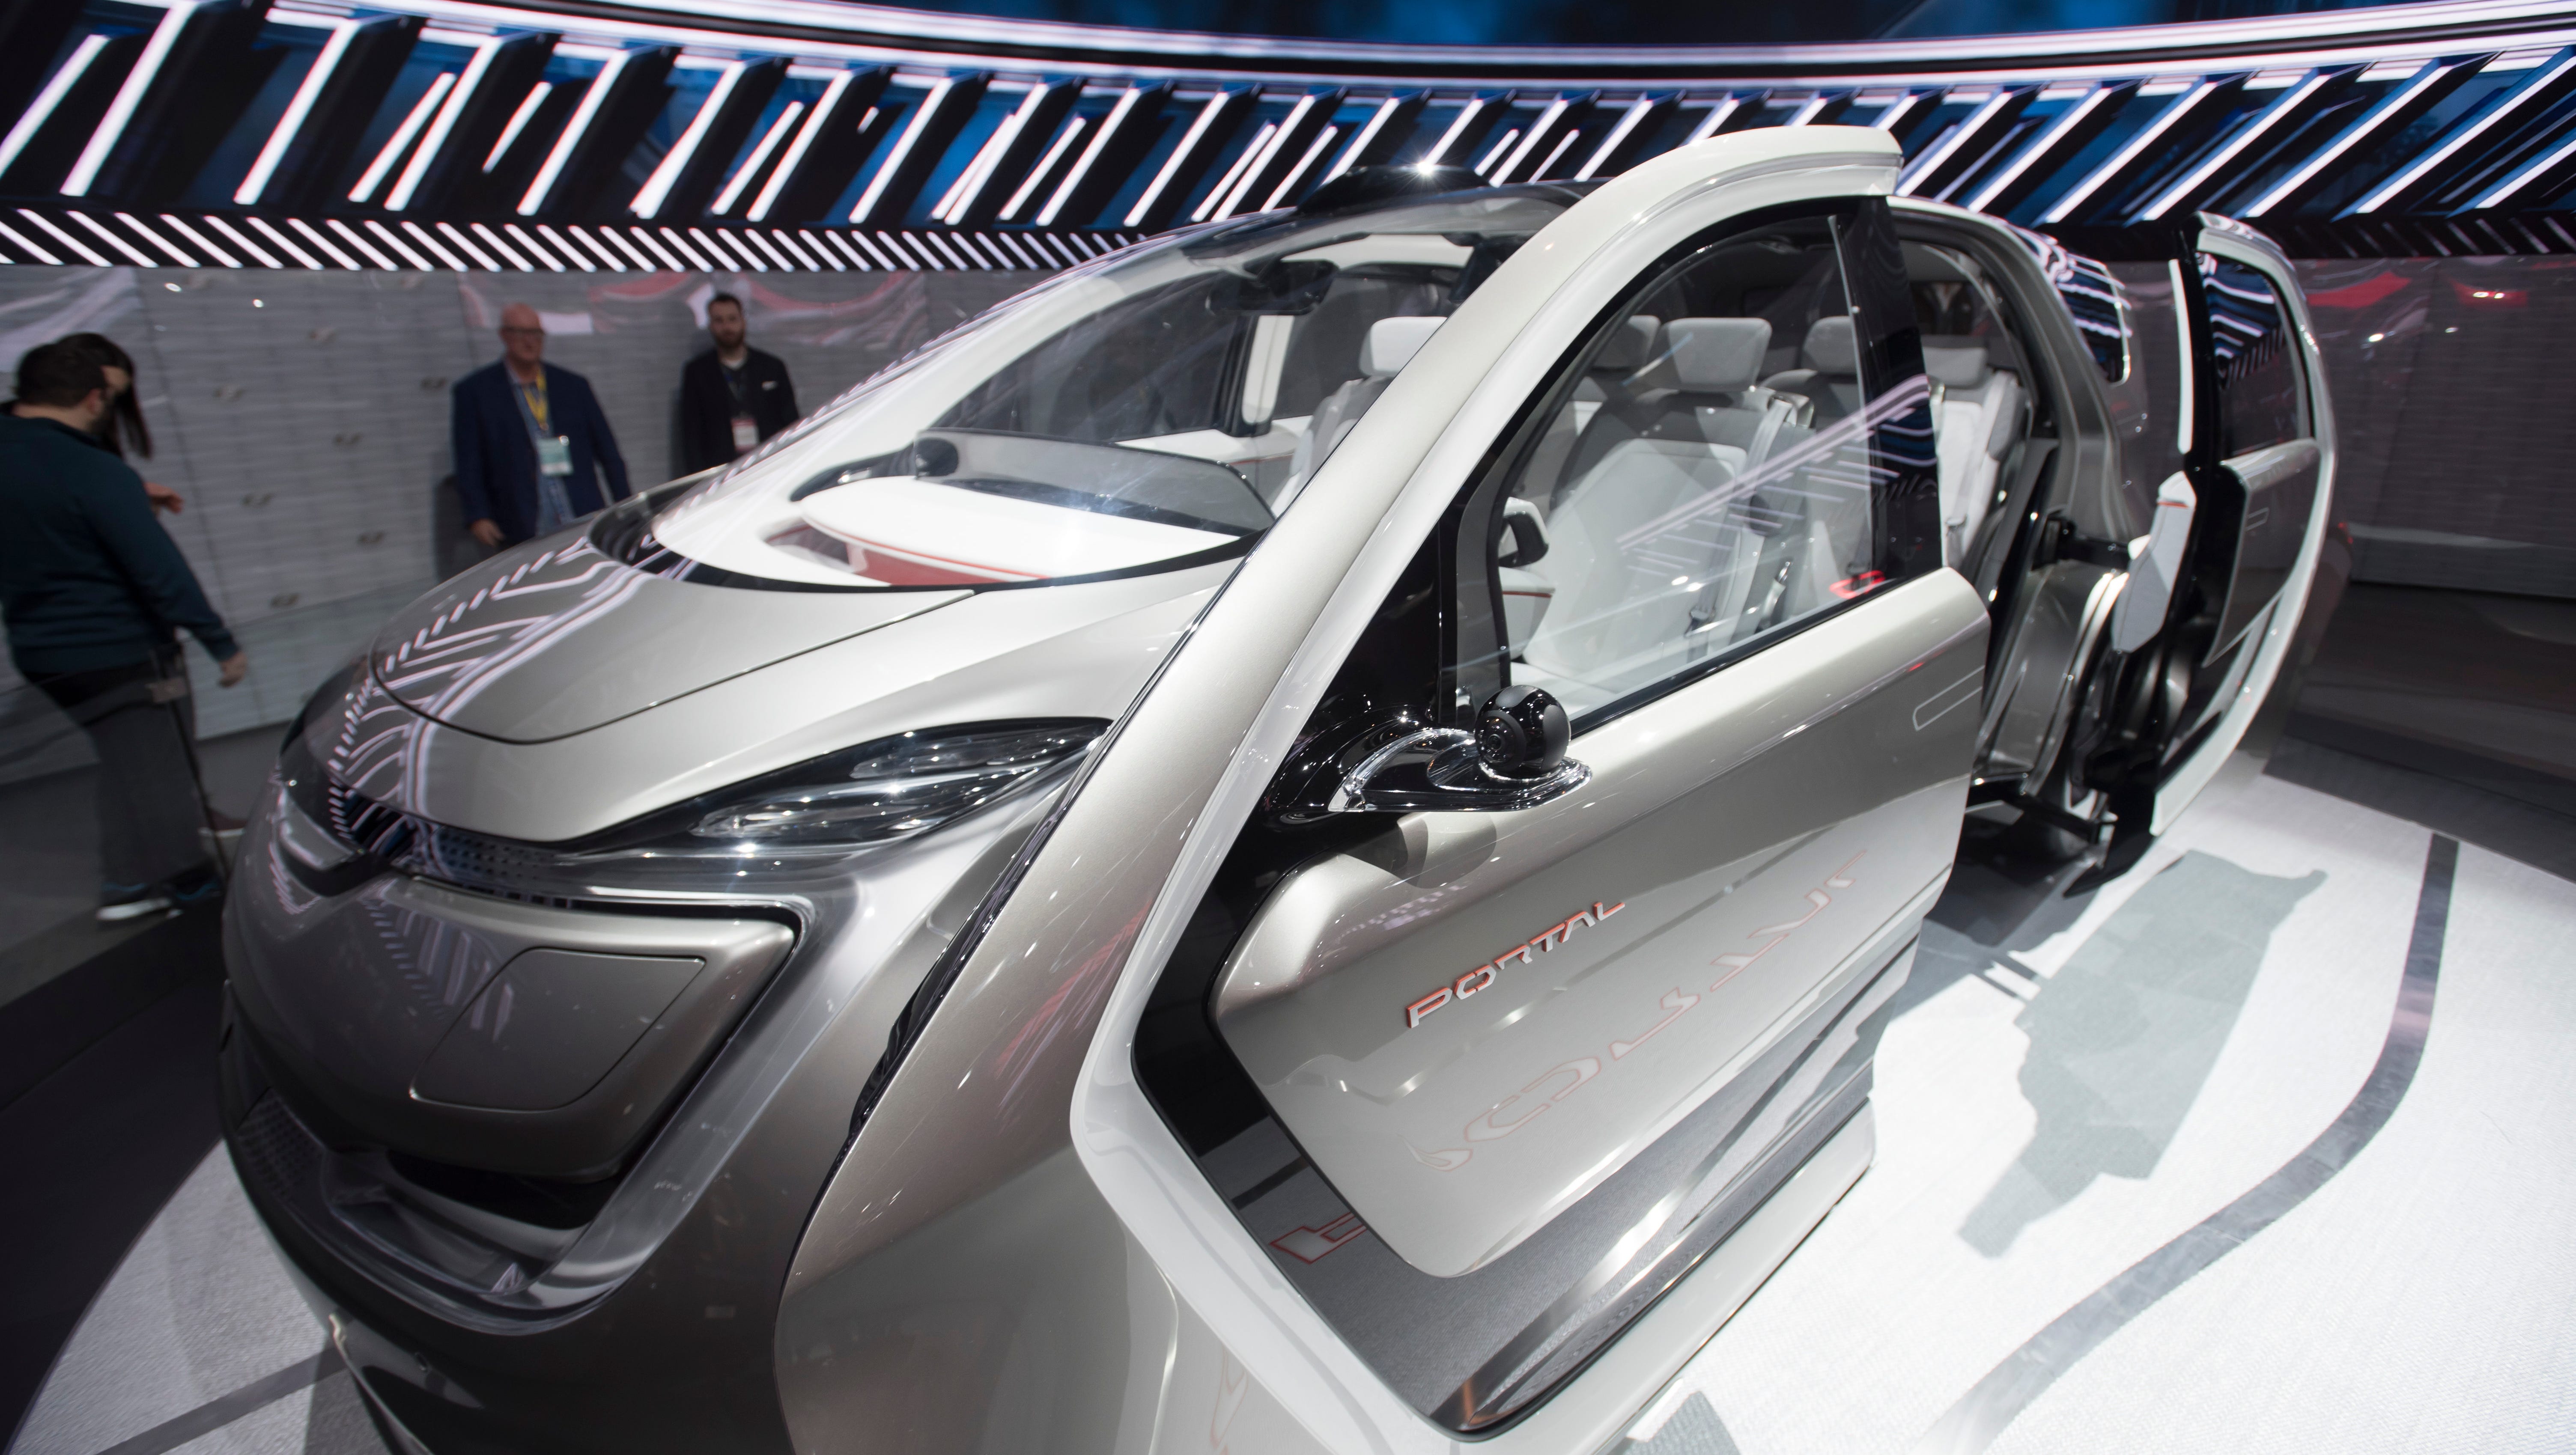 The Chrysler Portal concept is focused towards the millennial generation.